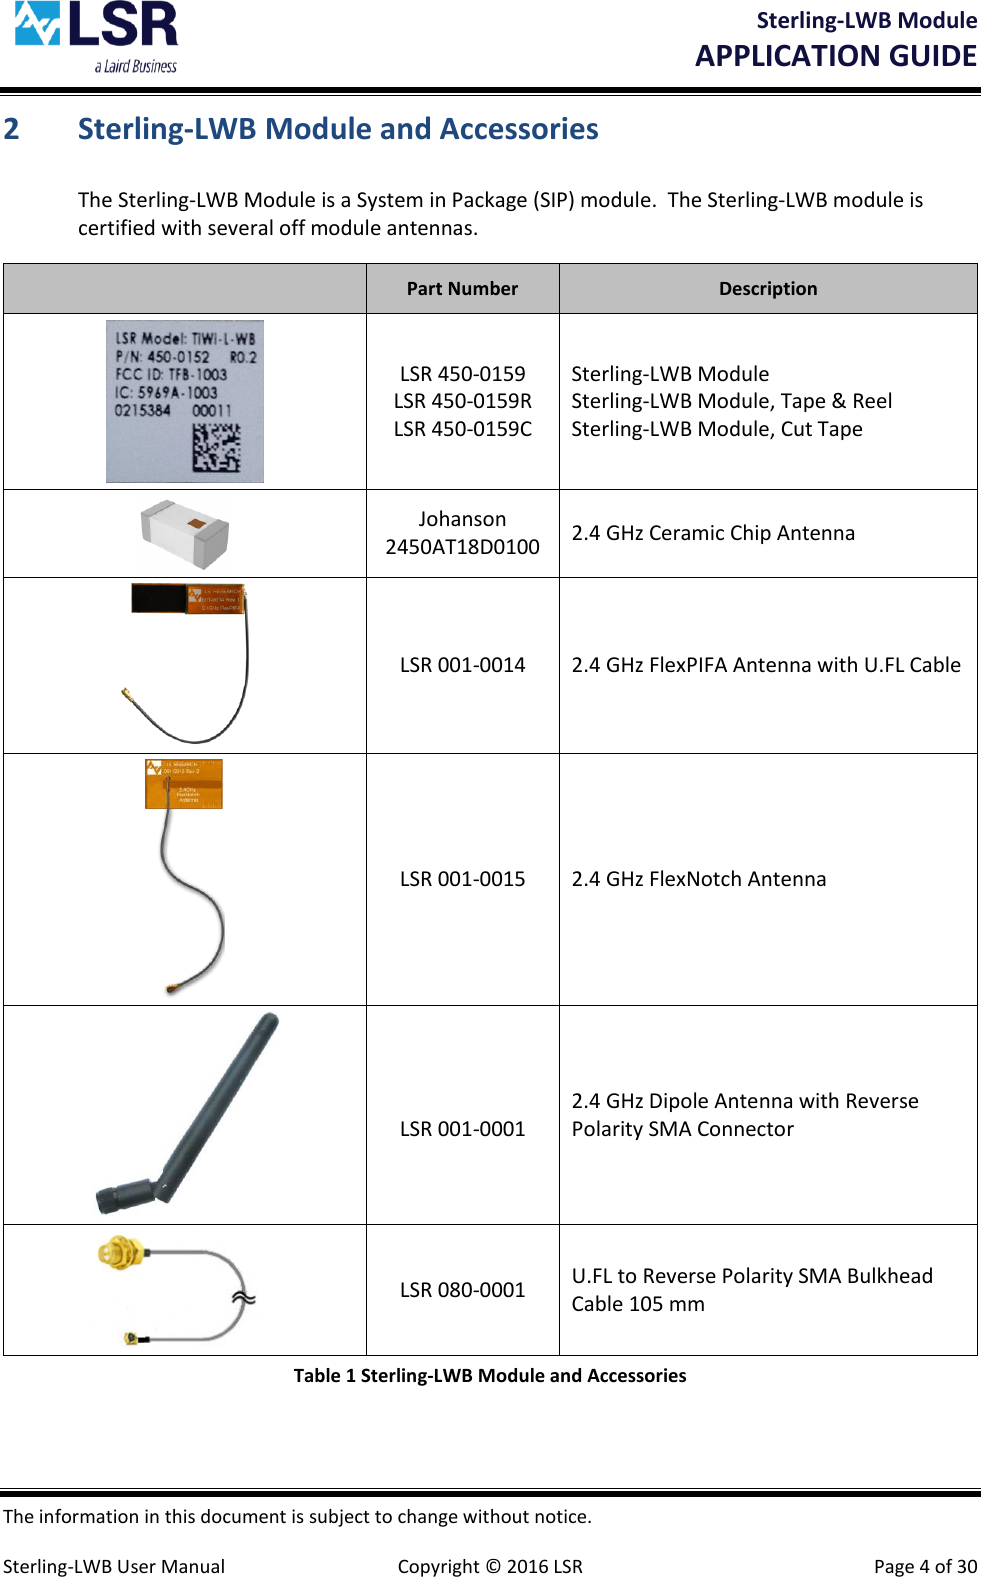 Sterling-LWB Module       APPLICATION GUIDE  The information in this document is subject to change without notice.  Sterling-LWB User Manual  Copyright © 2016 LSR  Page 4 of 30 2 Sterling-LWB Module and Accessories The Sterling-LWB Module is a System in Package (SIP) module.  The Sterling-LWB module is certified with several off module antennas.       Part Number Description  LSR 450-0159 LSR 450-0159R LSR 450-0159C Sterling-LWB Module Sterling-LWB Module, Tape &amp; Reel Sterling-LWB Module, Cut Tape  Johanson 2450AT18D0100 2.4 GHz Ceramic Chip Antenna  LSR 001-0014 2.4 GHz FlexPIFA Antenna with U.FL Cable  LSR 001-0015 2.4 GHz FlexNotch Antenna   LSR 001-0001 2.4 GHz Dipole Antenna with Reverse Polarity SMA Connector  LSR 080-0001 U.FL to Reverse Polarity SMA Bulkhead Cable 105 mm Table 1 Sterling-LWB Module and Accessories  